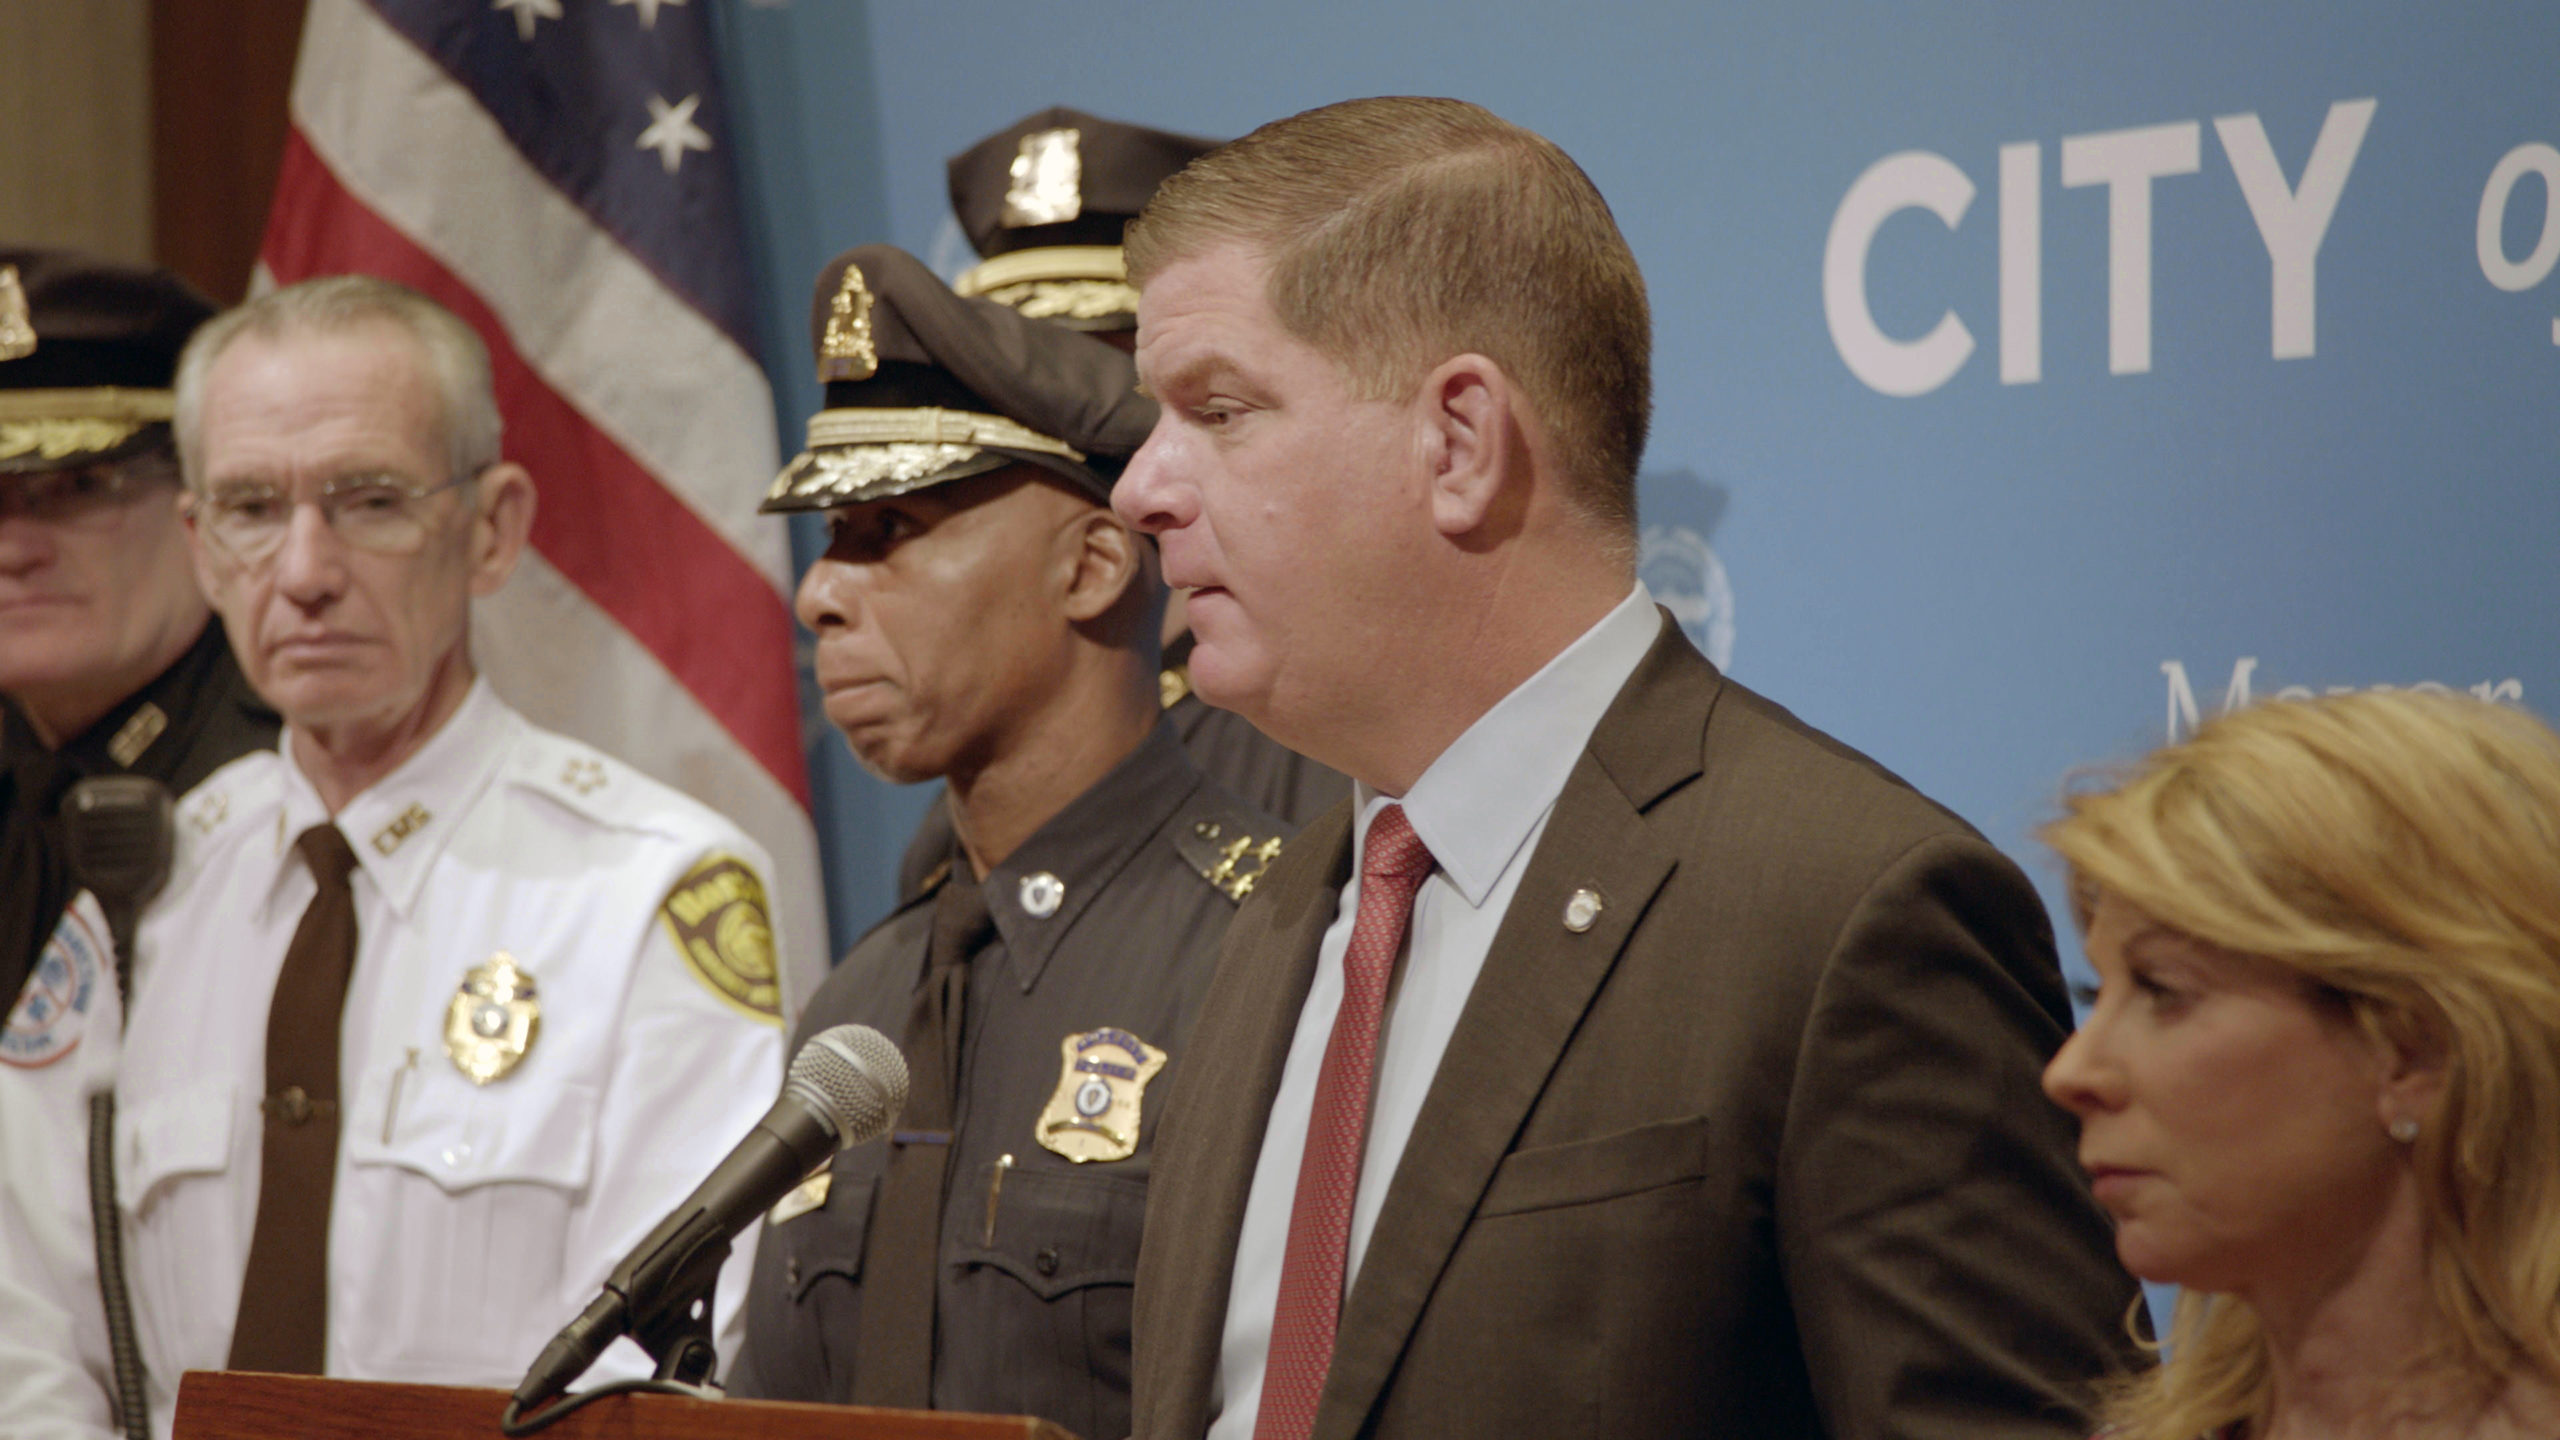 Mayor and police at press conferemce in Frederick Wiseman's newest film, 